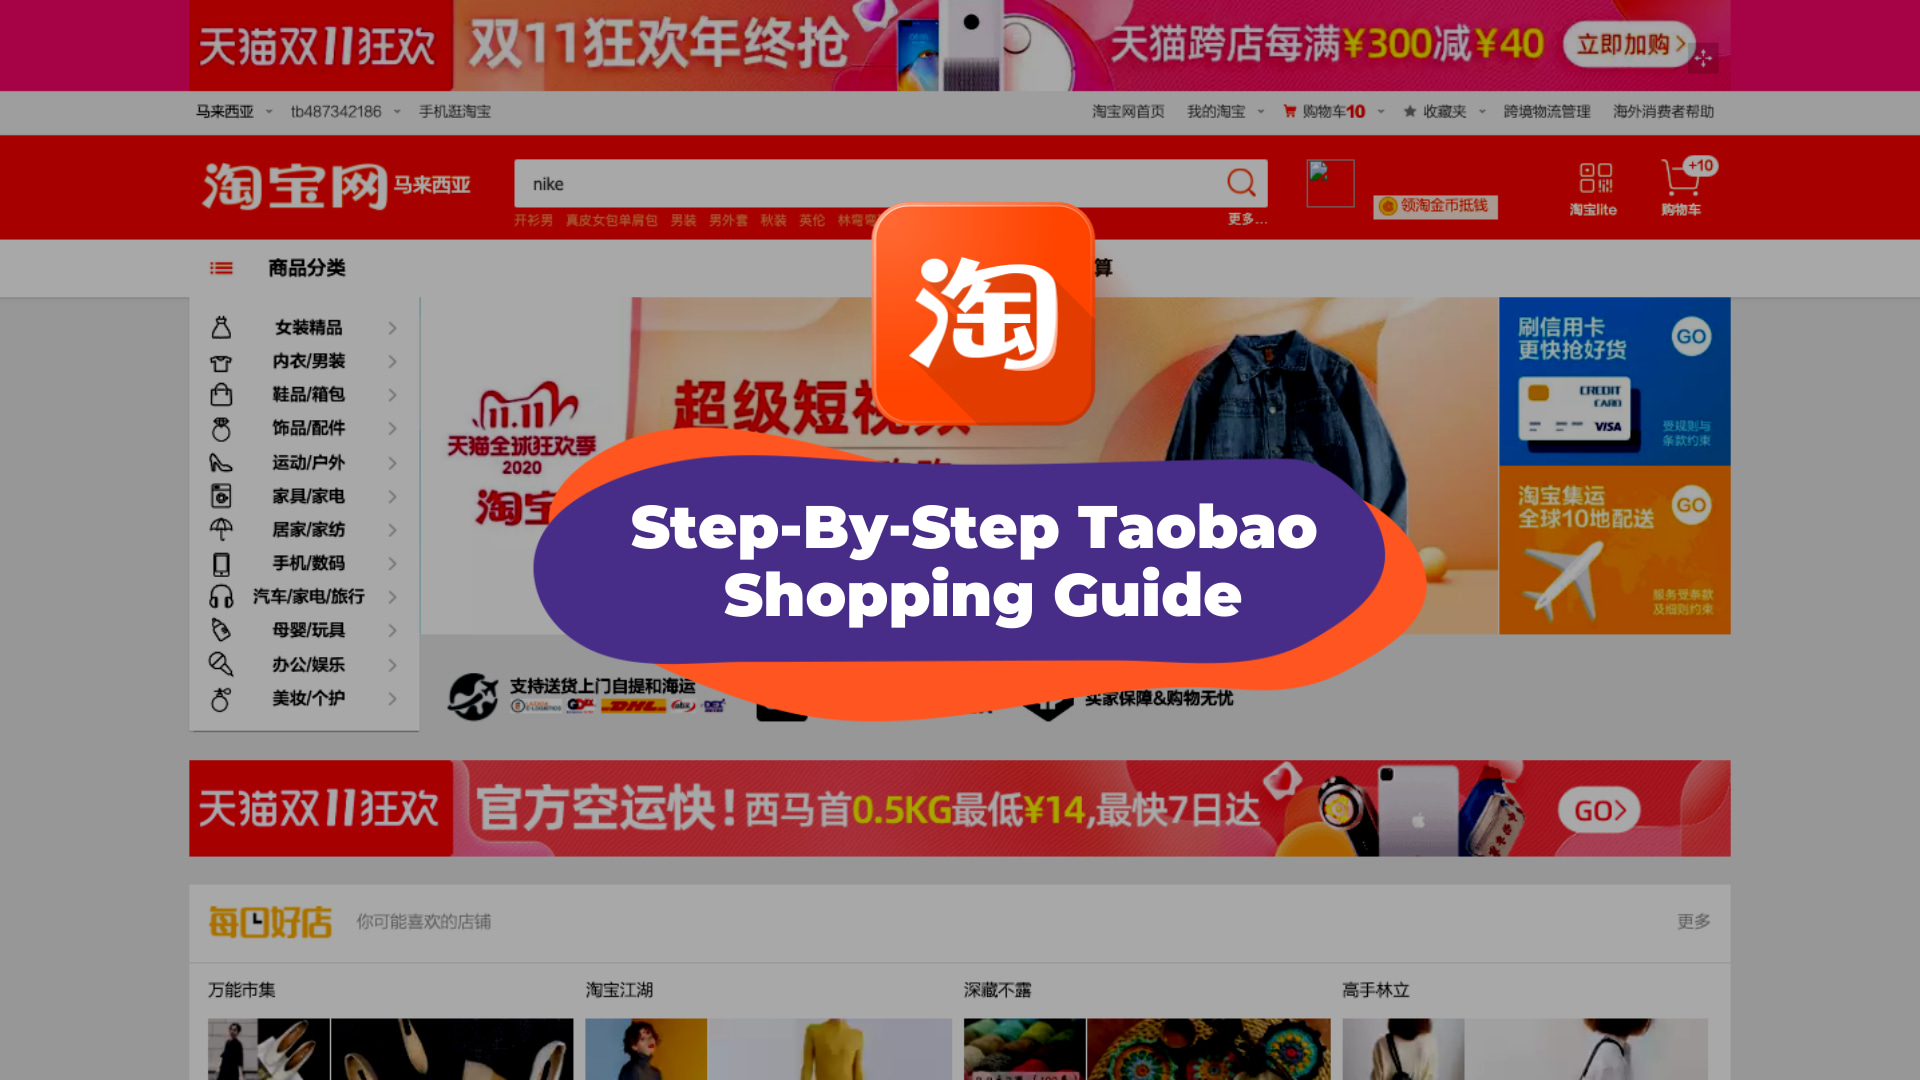 How To Shop On Taobao A Detailed Step By Step Taobao Guide Klook Travel Blog